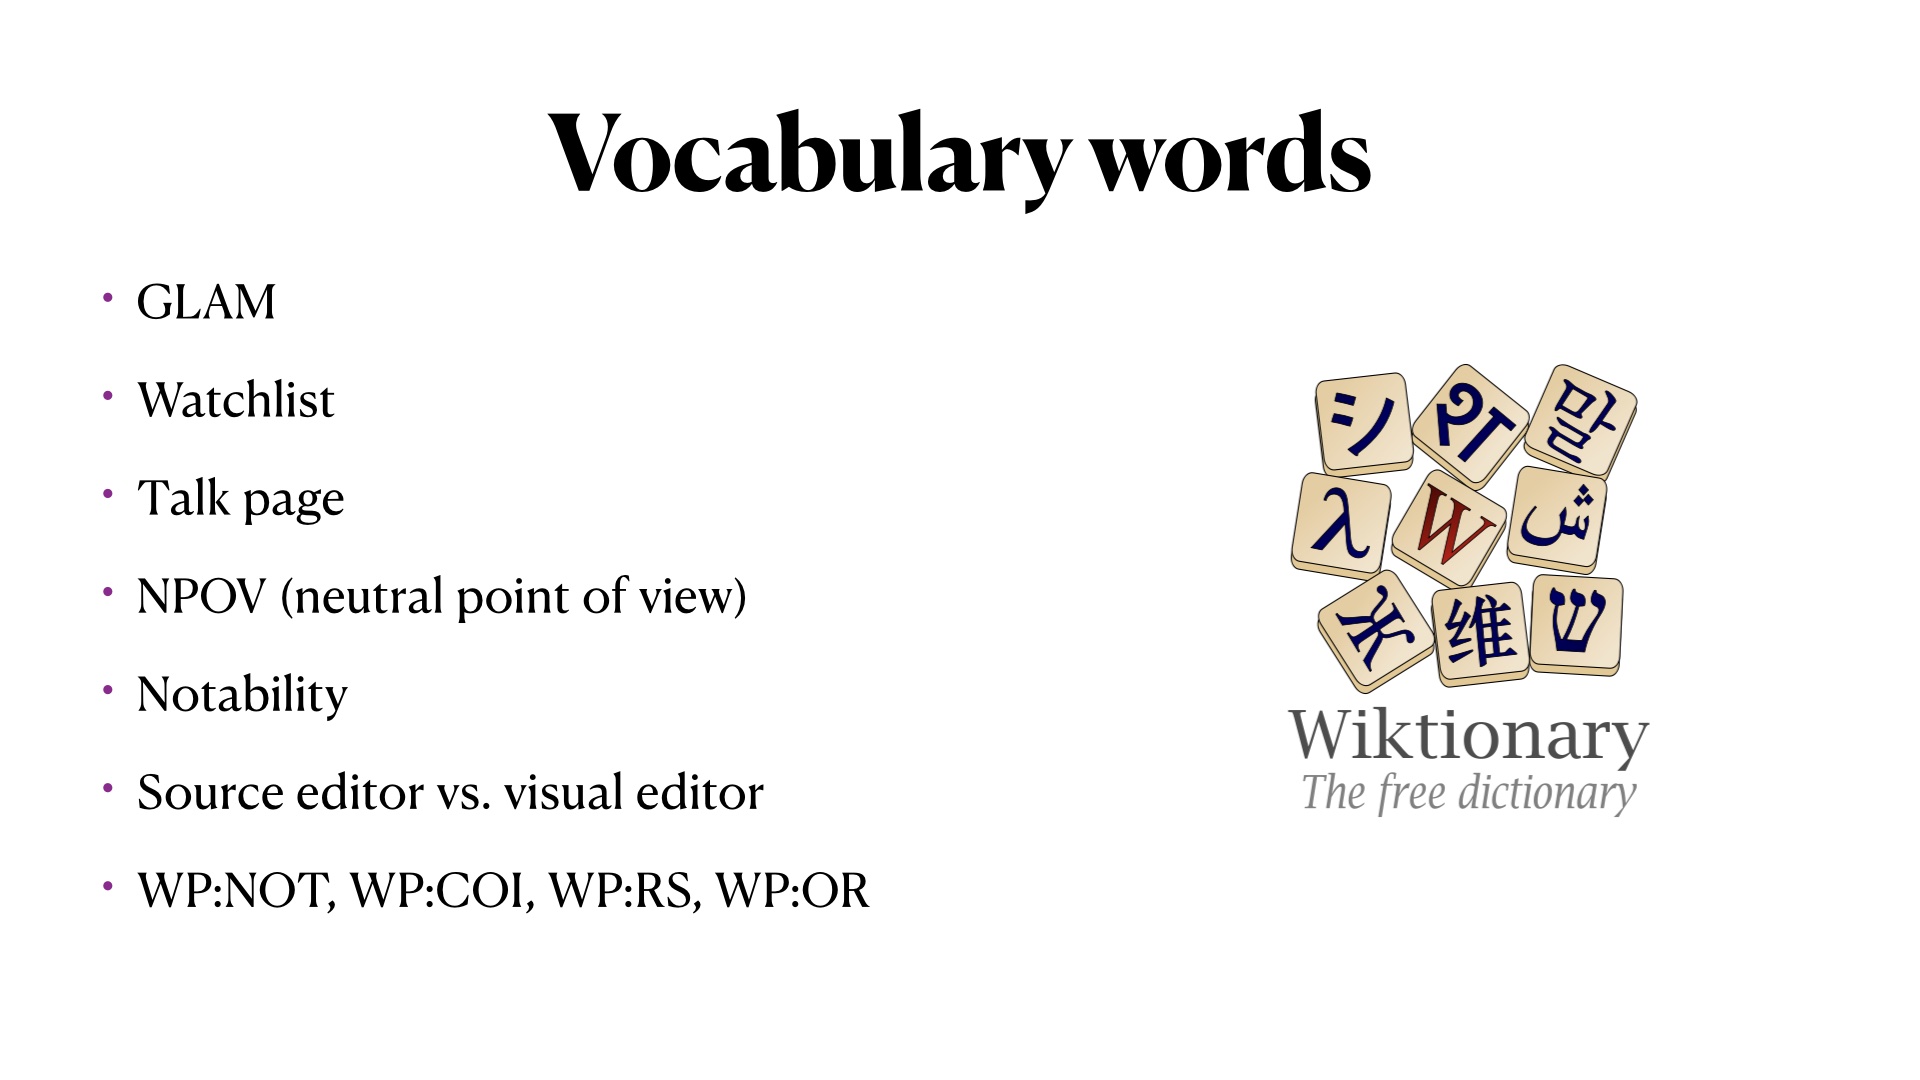 Vocabulary words: GLAM,
Watchlist, 
Talk page, 
NPOV (neutral point of view), 
Notability, 
Source editor vs. visual editor, 
WP:NOT, WP:COI, WP:RS, WP:OR